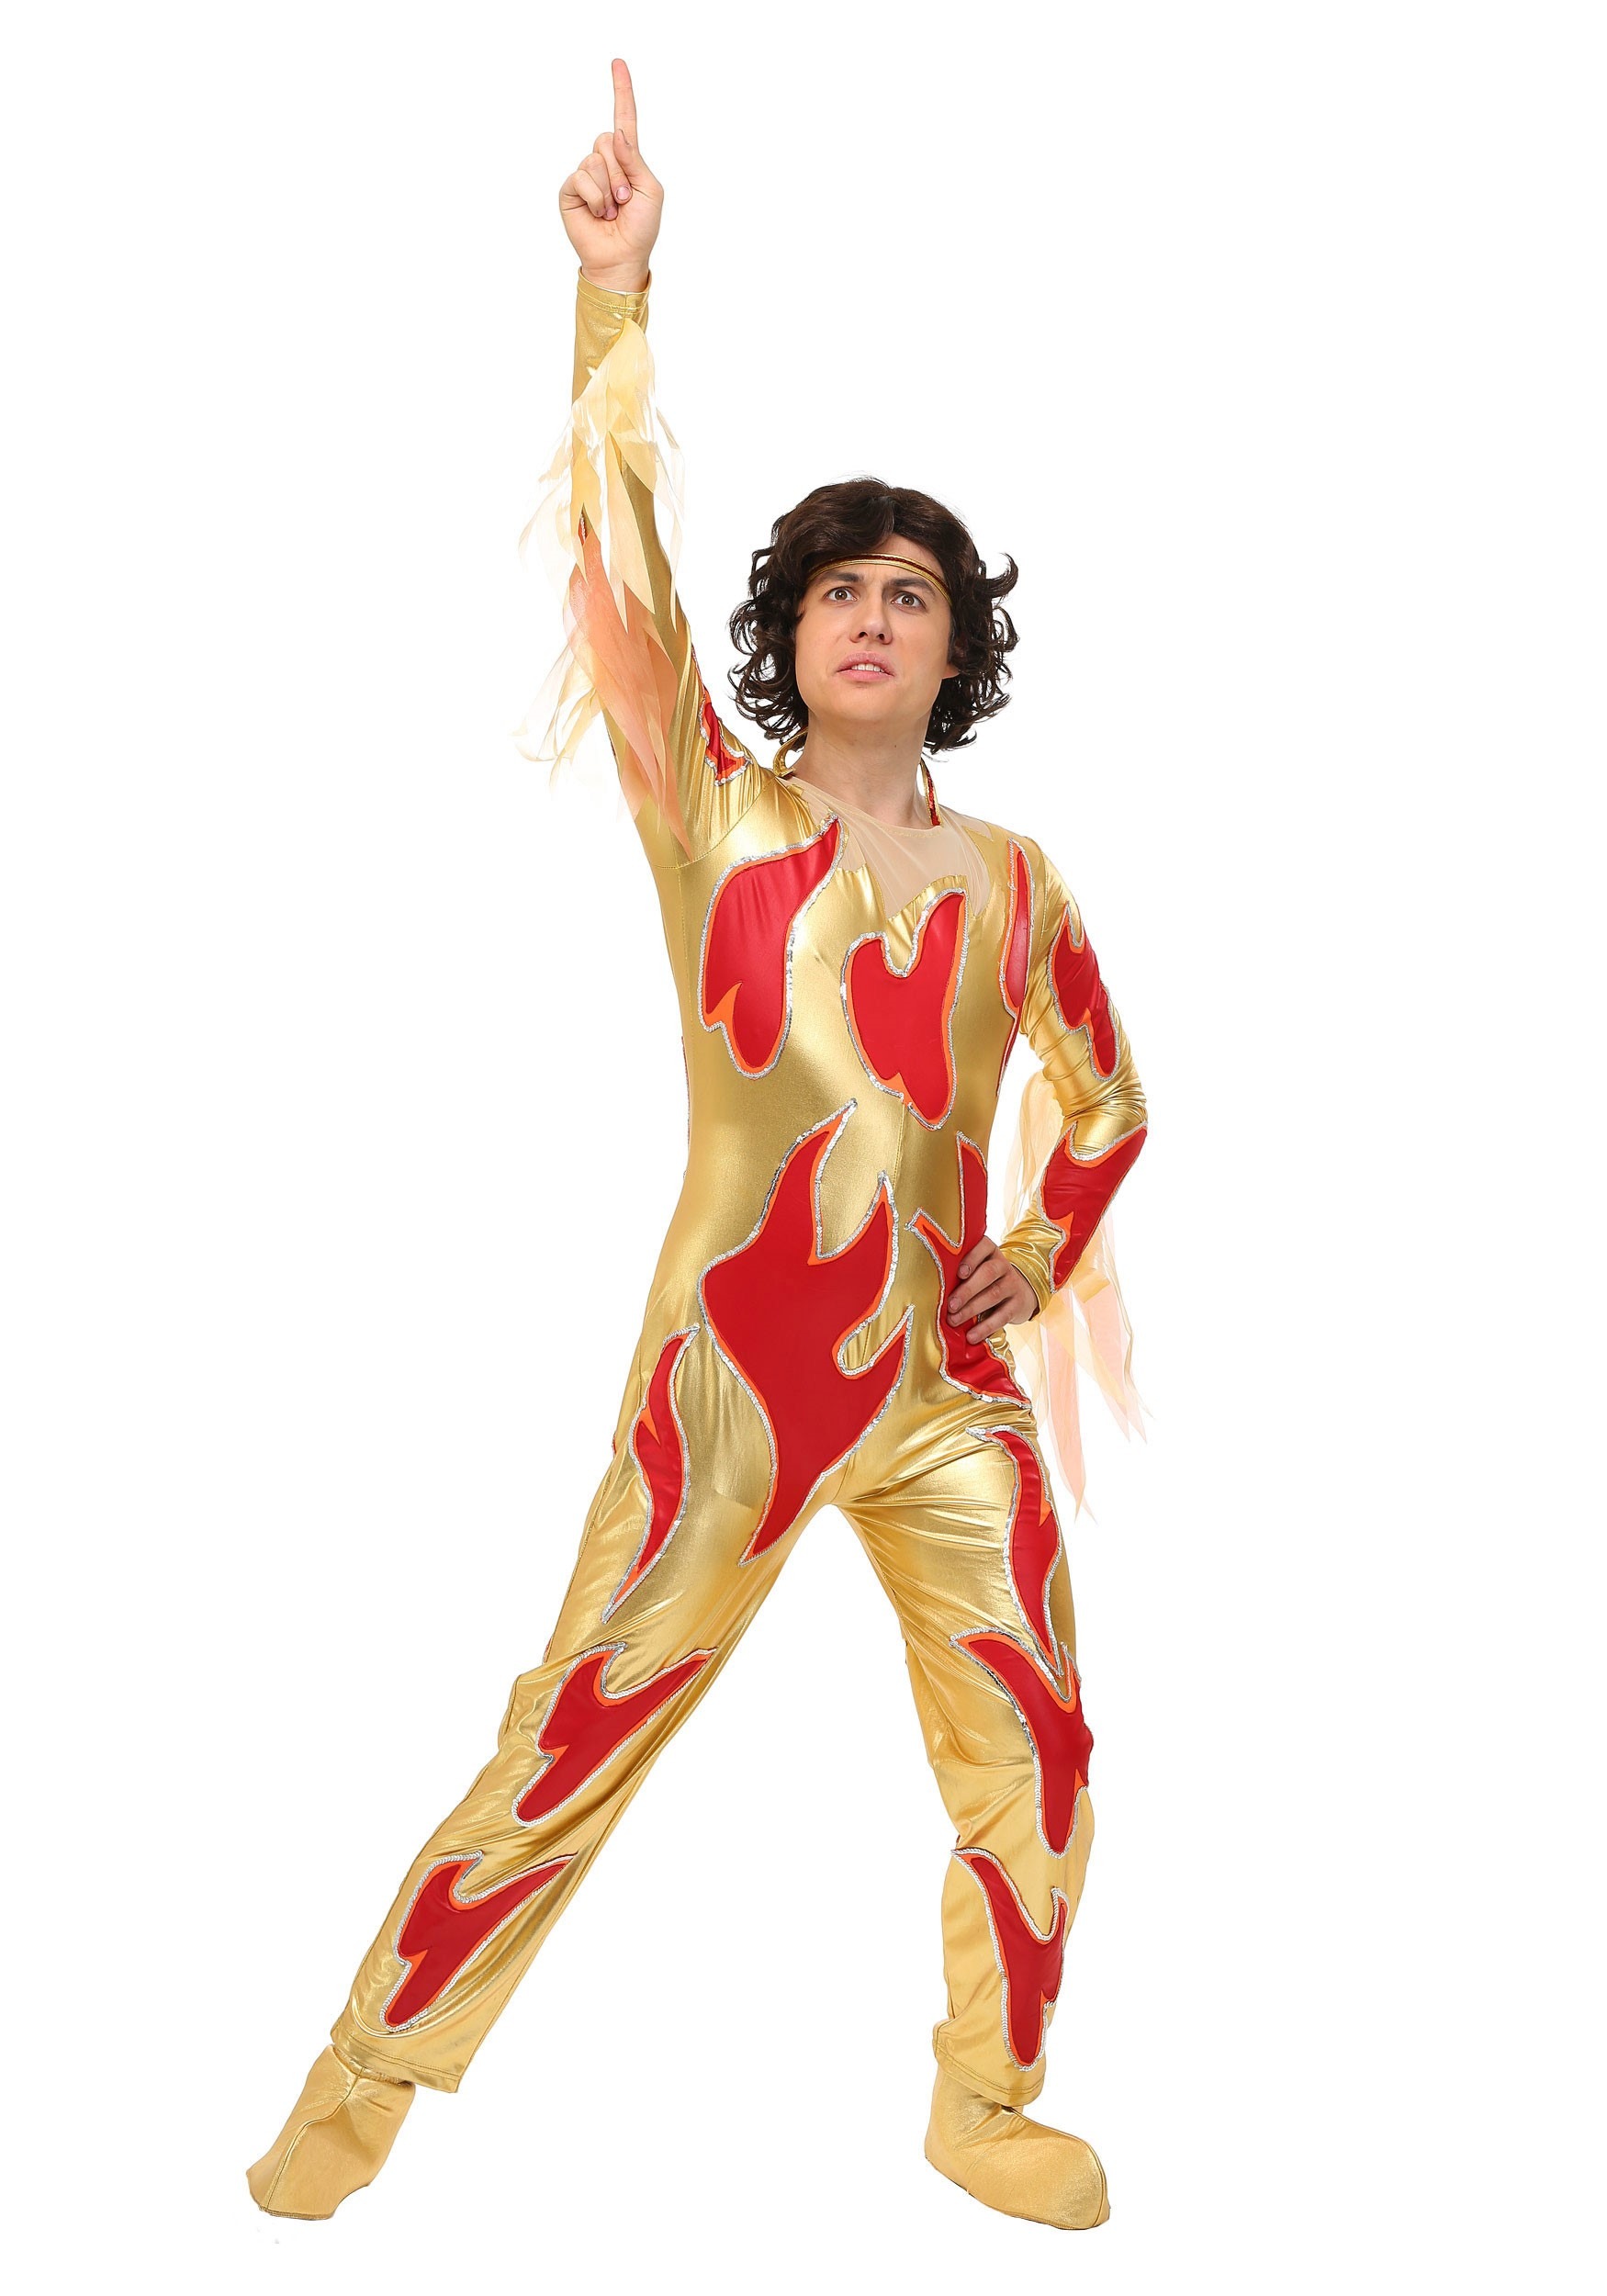 Photos - Fancy Dress Glory FUN Costumes Blades of  Fire Jumpsuit for Men Orange/Red FUN2283A 